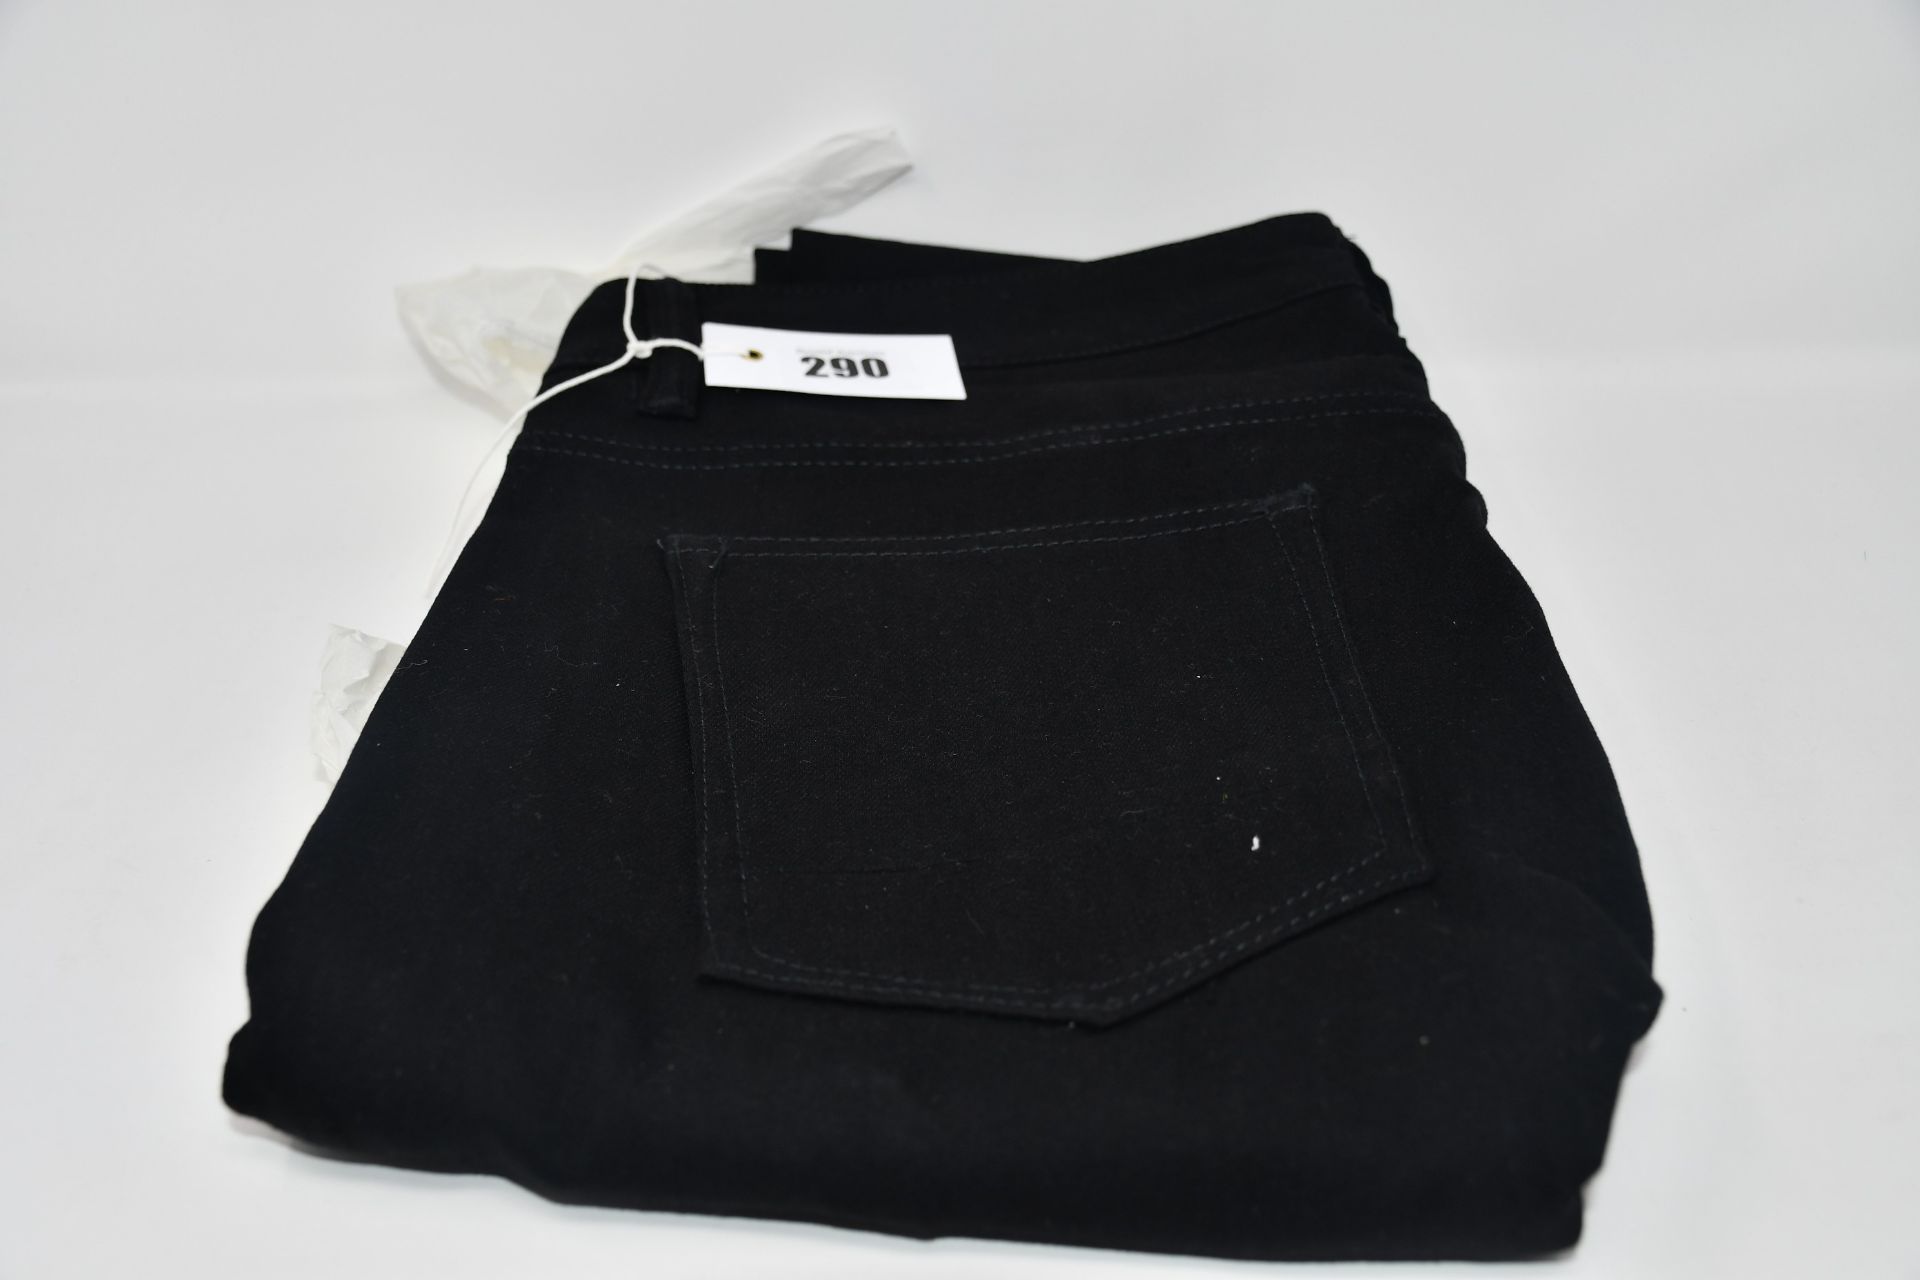 One men's as new Natural Selection skinny black jeans size 34/32 (No tags).